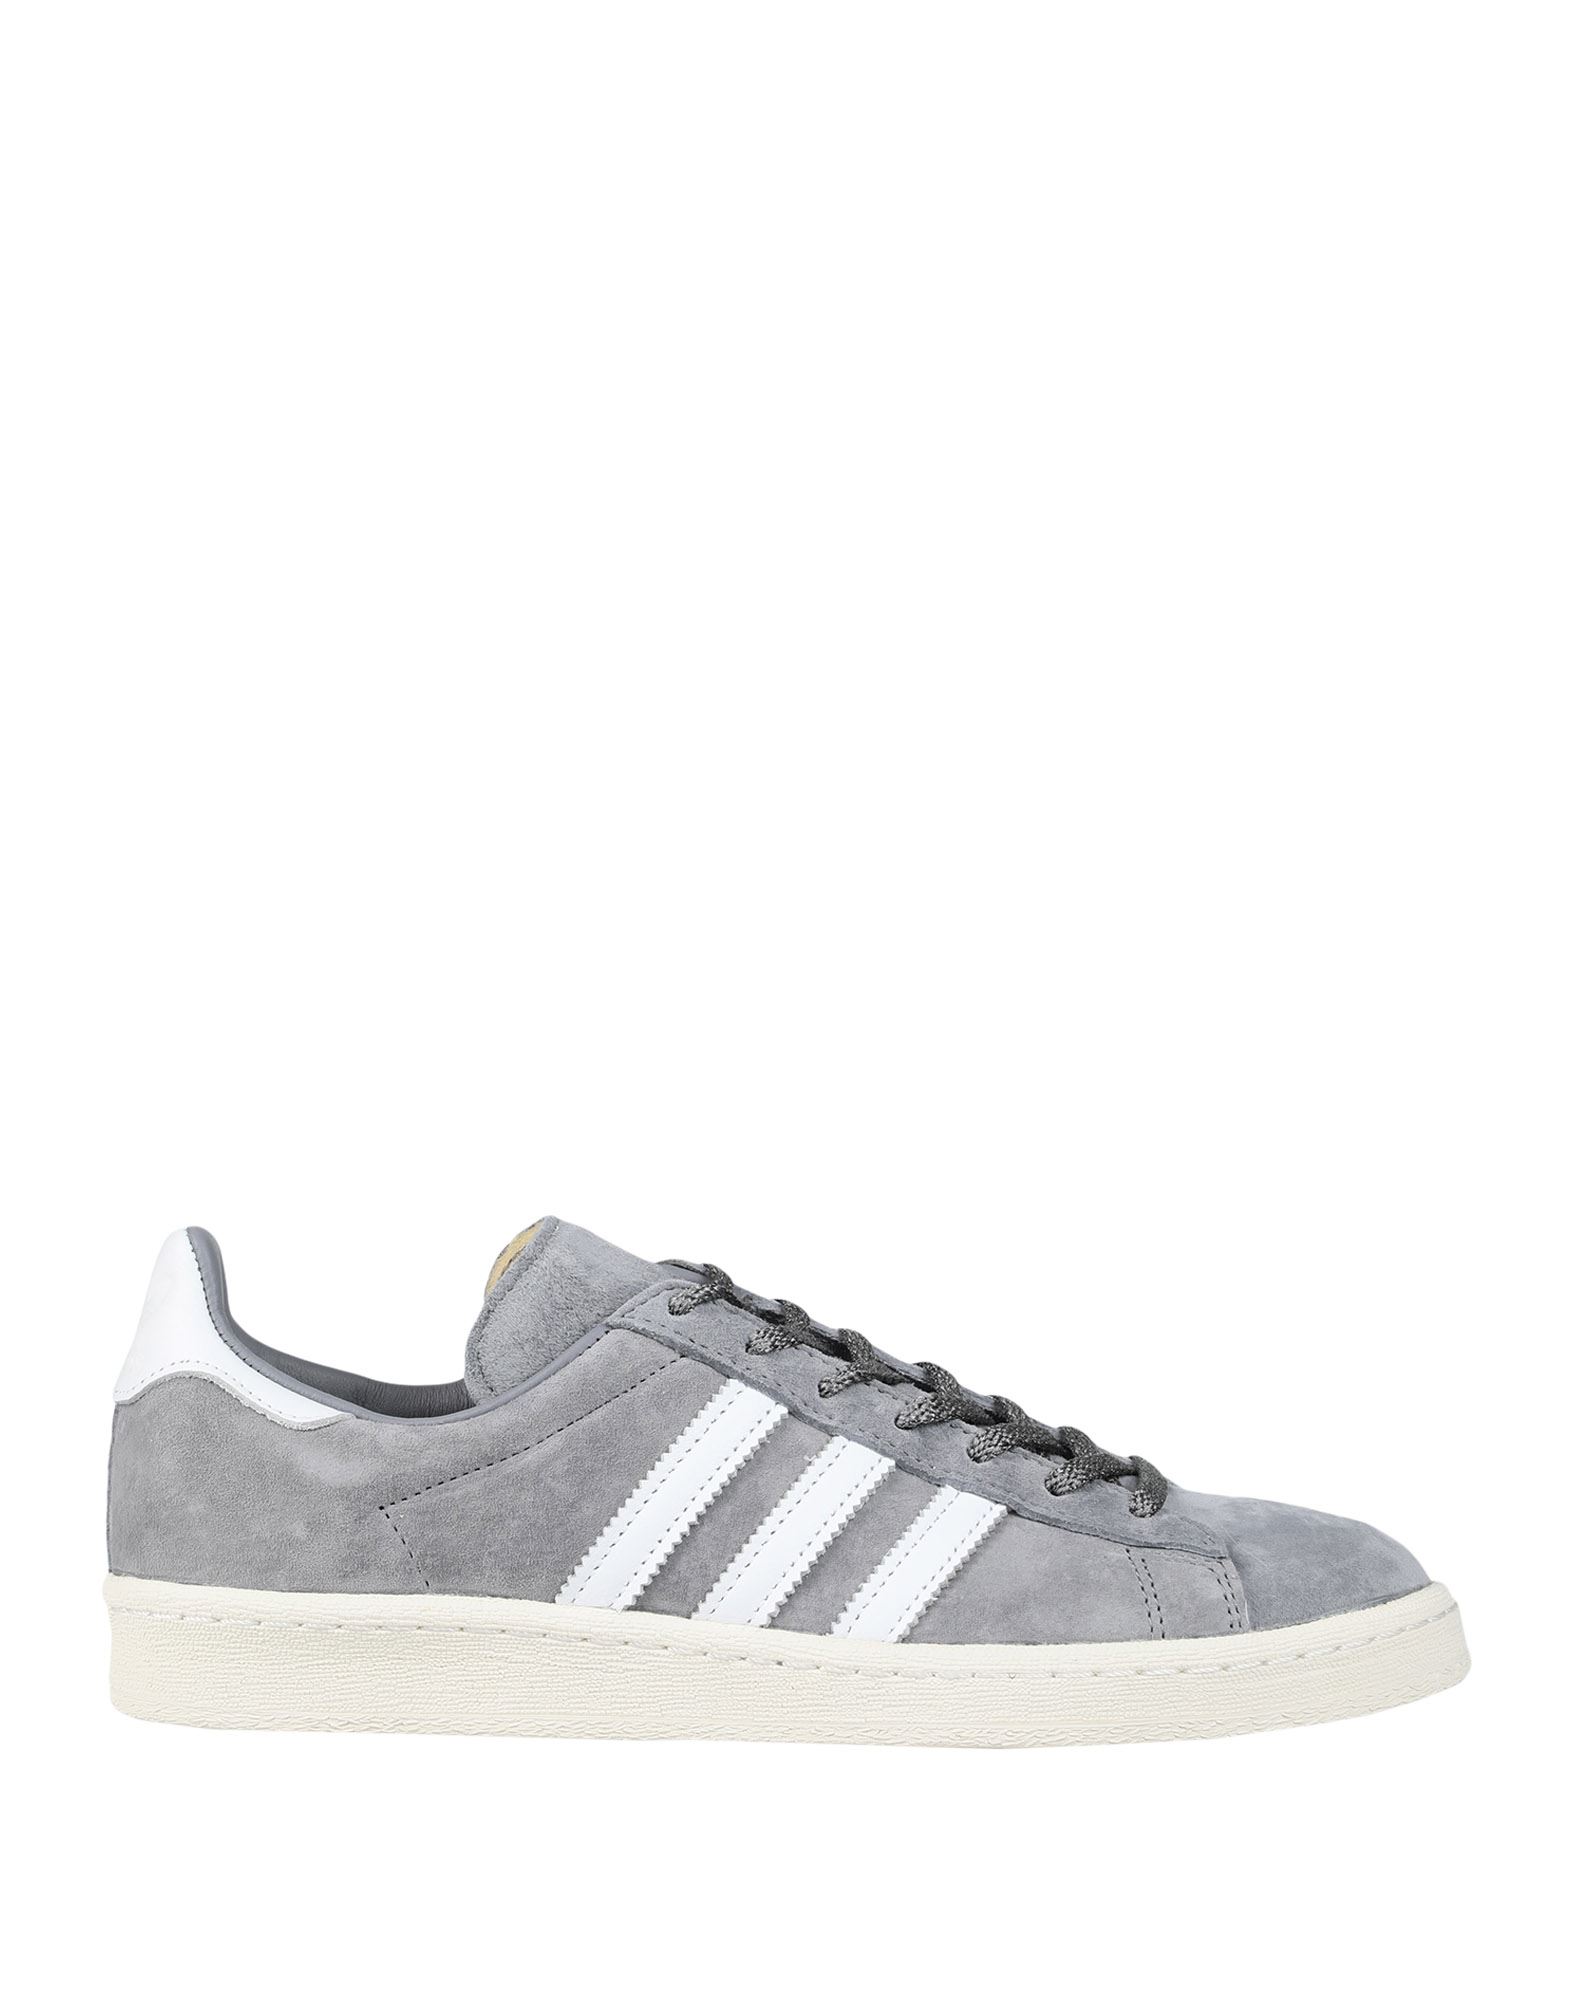 Adidas Originals Campus 80s Man Sneakers Grey Size 11.5 Soft Leather